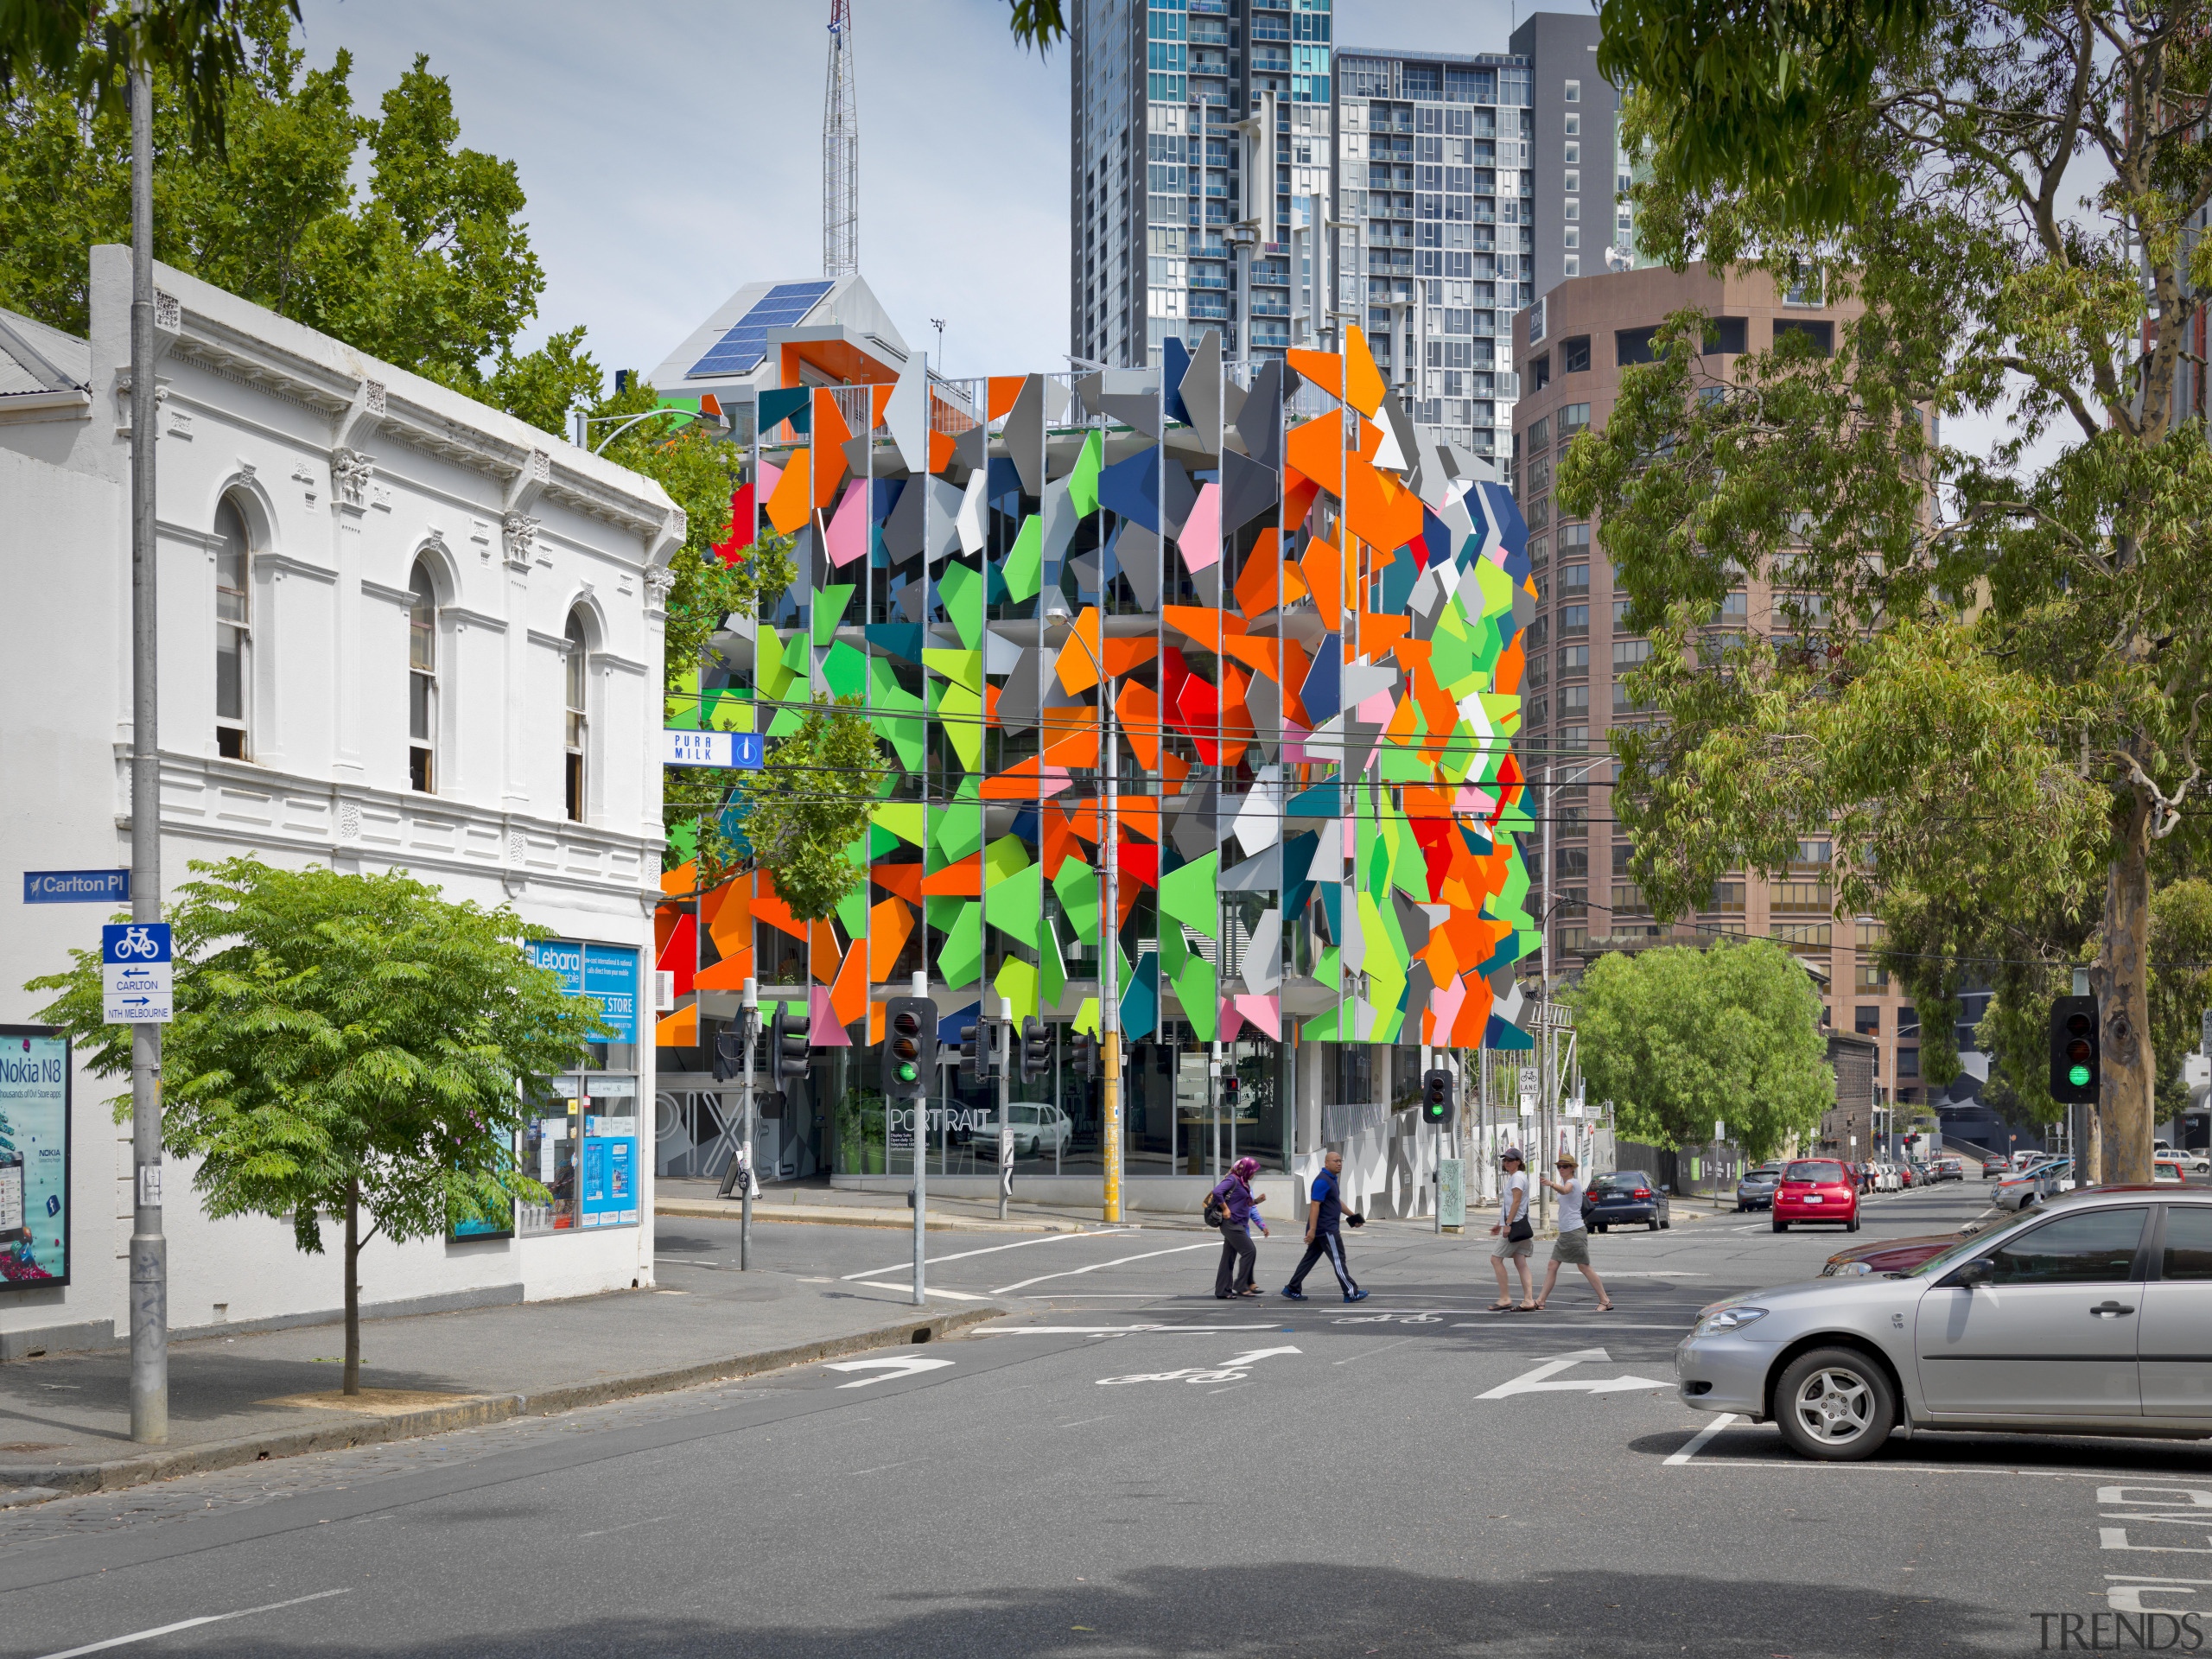 View of Pixel Building, with colorful exterior flags, advertising, city, facade, mixed use, mural, neighbourhood, road, street, tree, urban area, wall, gray